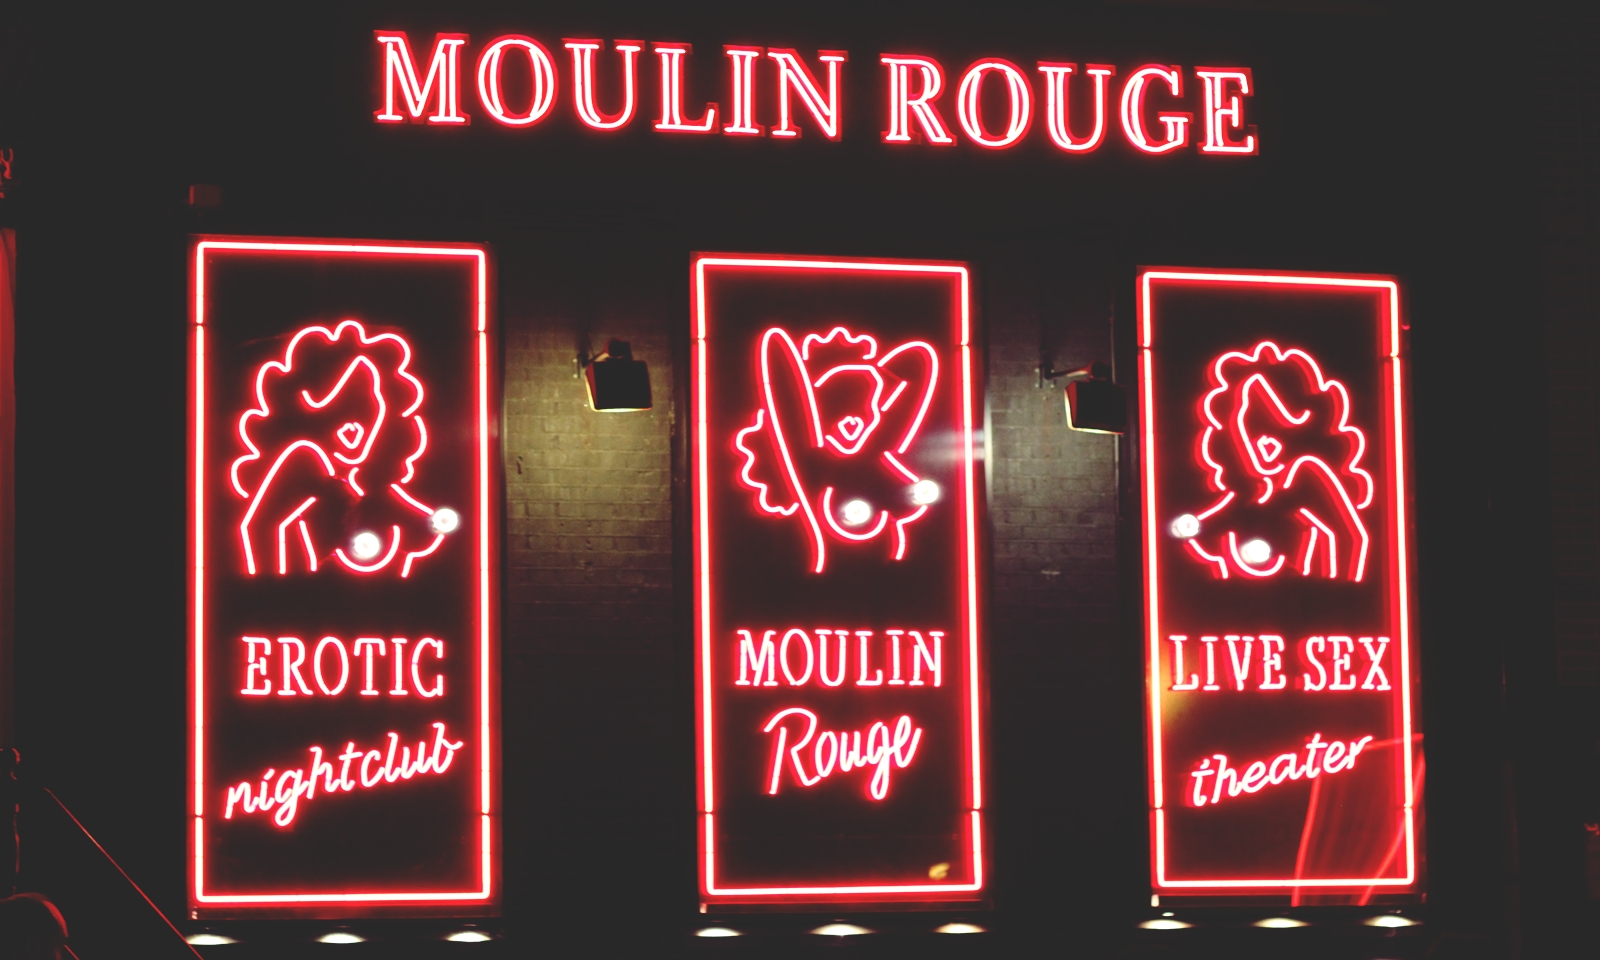 Moulin Rouge Amsterdam.